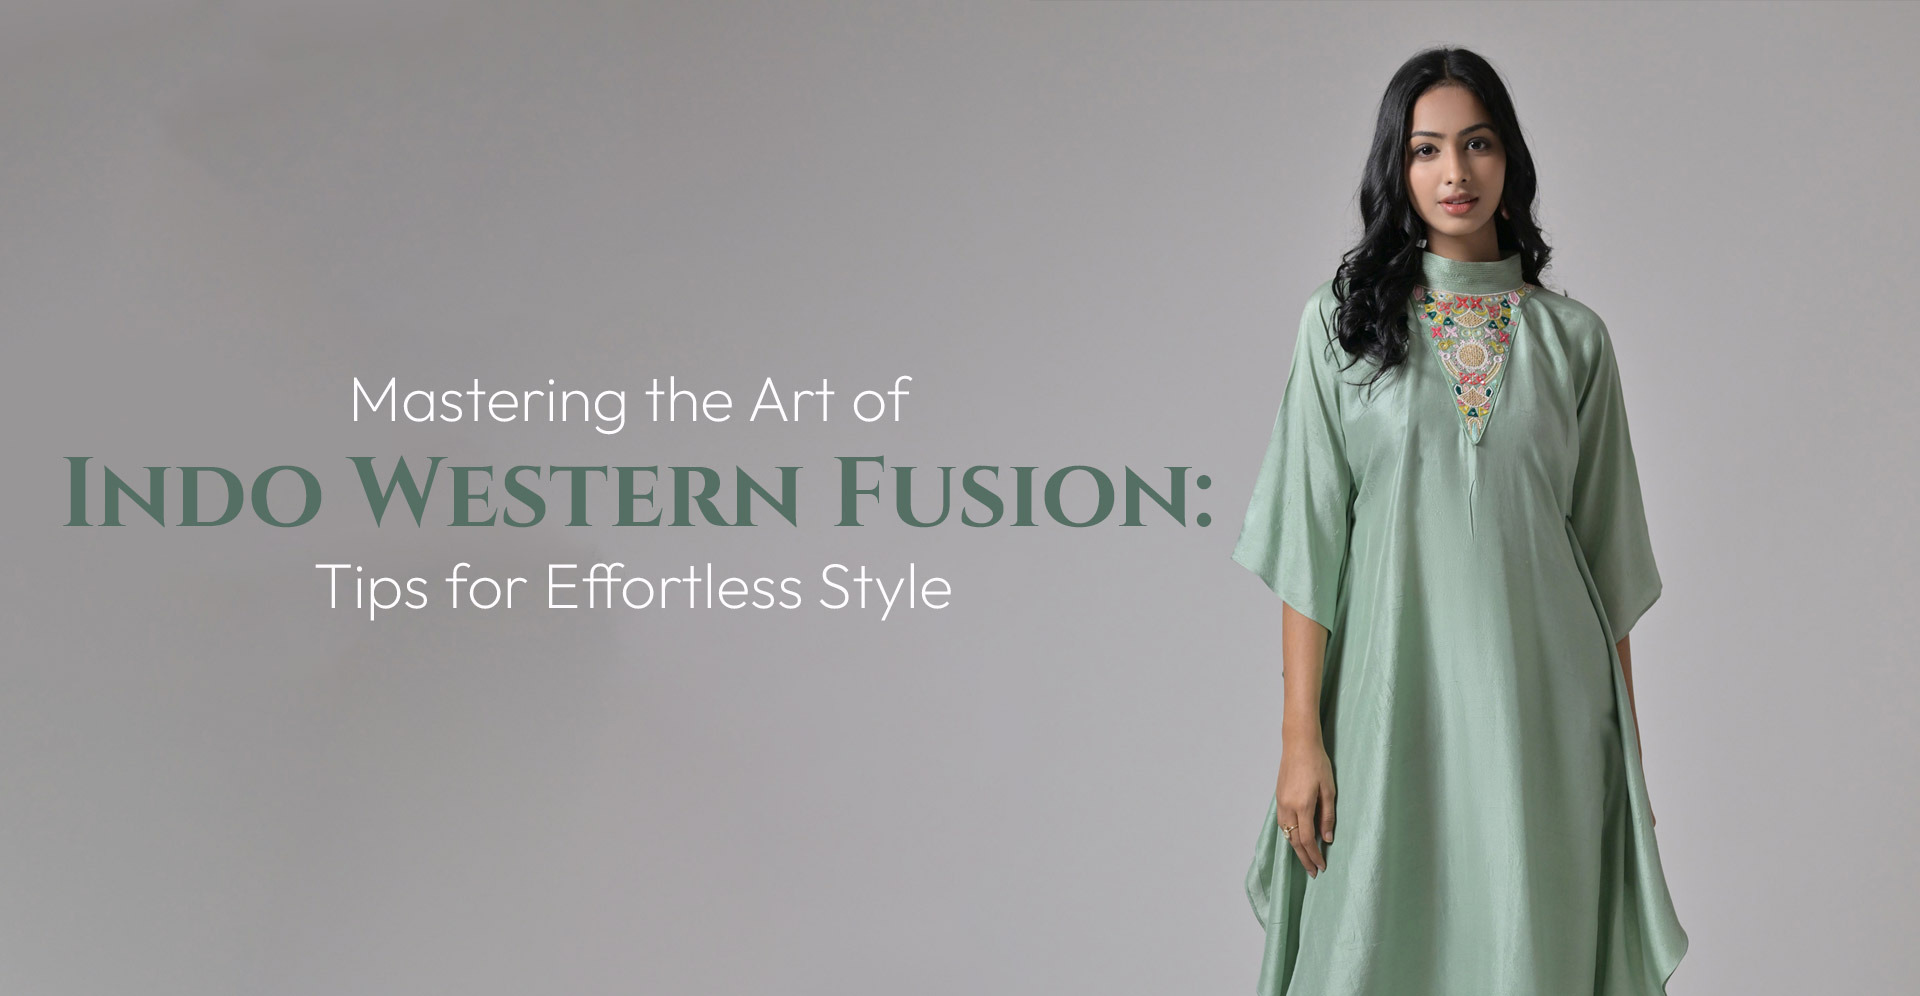 Mastering the Art of Indo-Western Fusion: Tips for Effortless Style